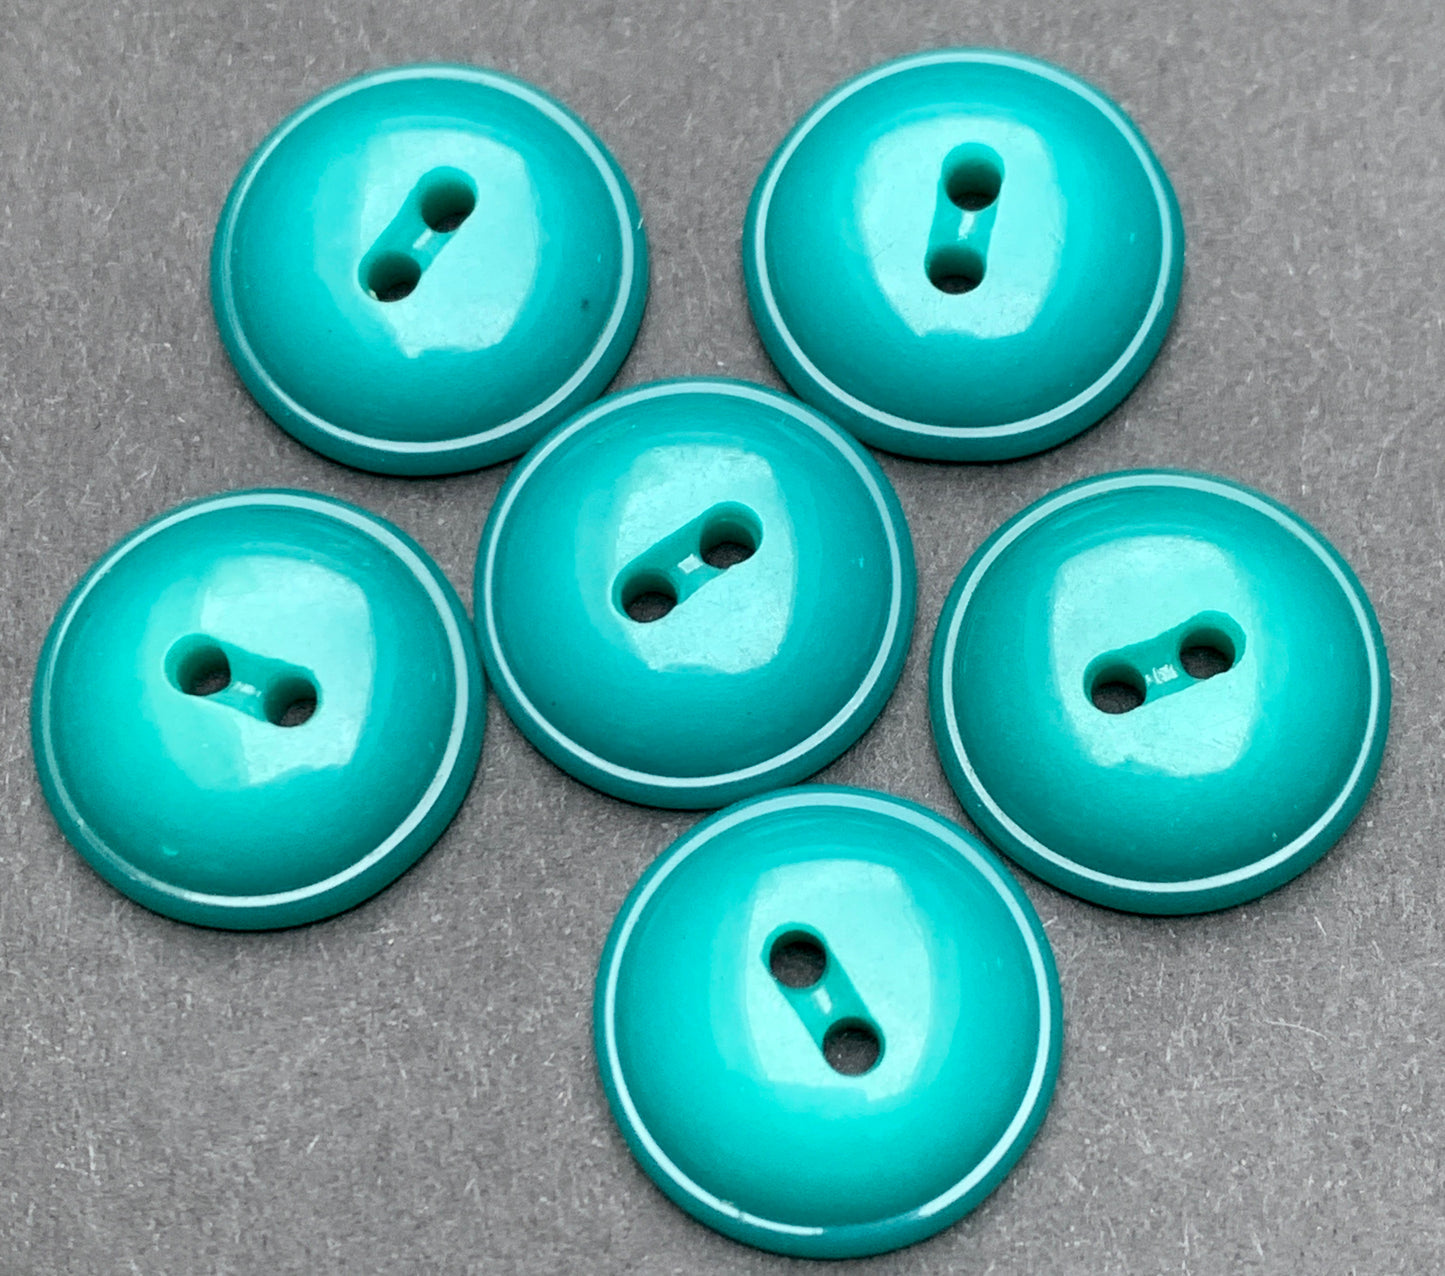 6 Turquoise/Teal 1.5cm Dome Shaped Vintage Buttons